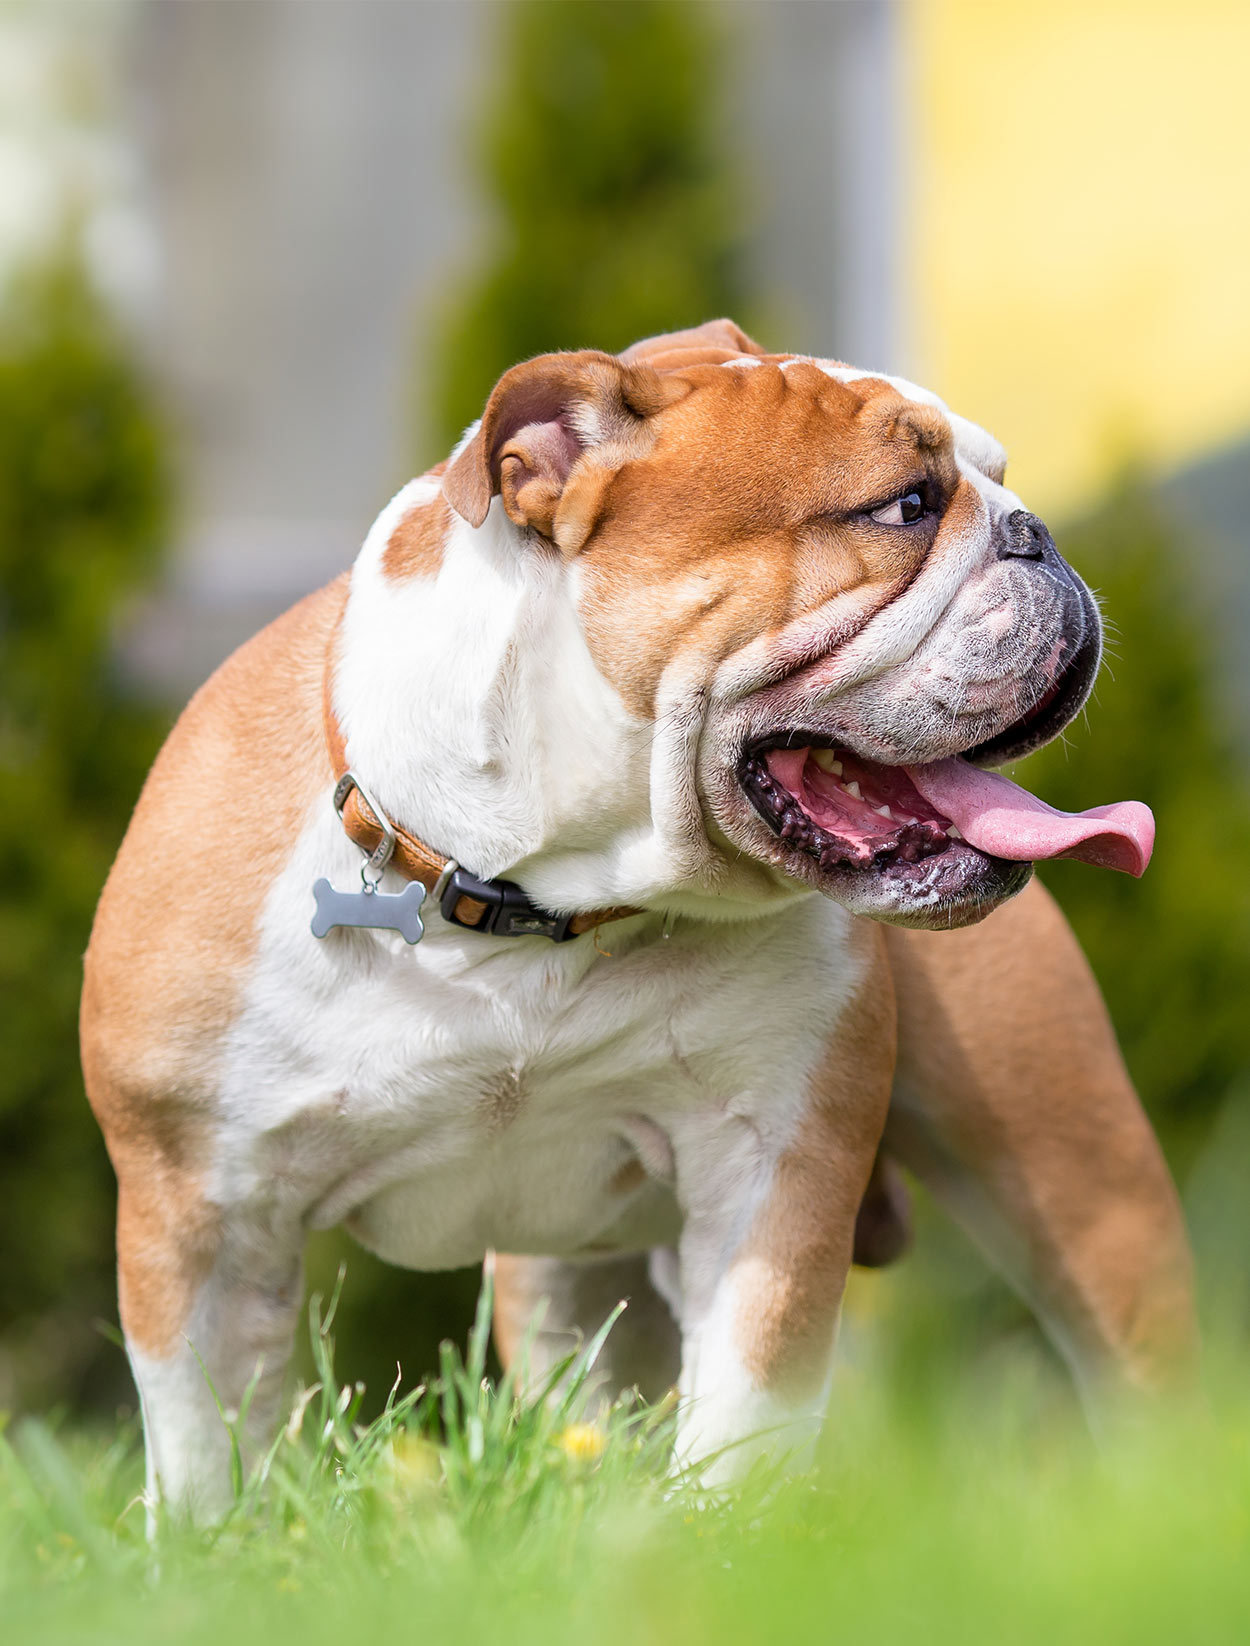 Bulldog Breeds Which Types Make The Very Best Pets?